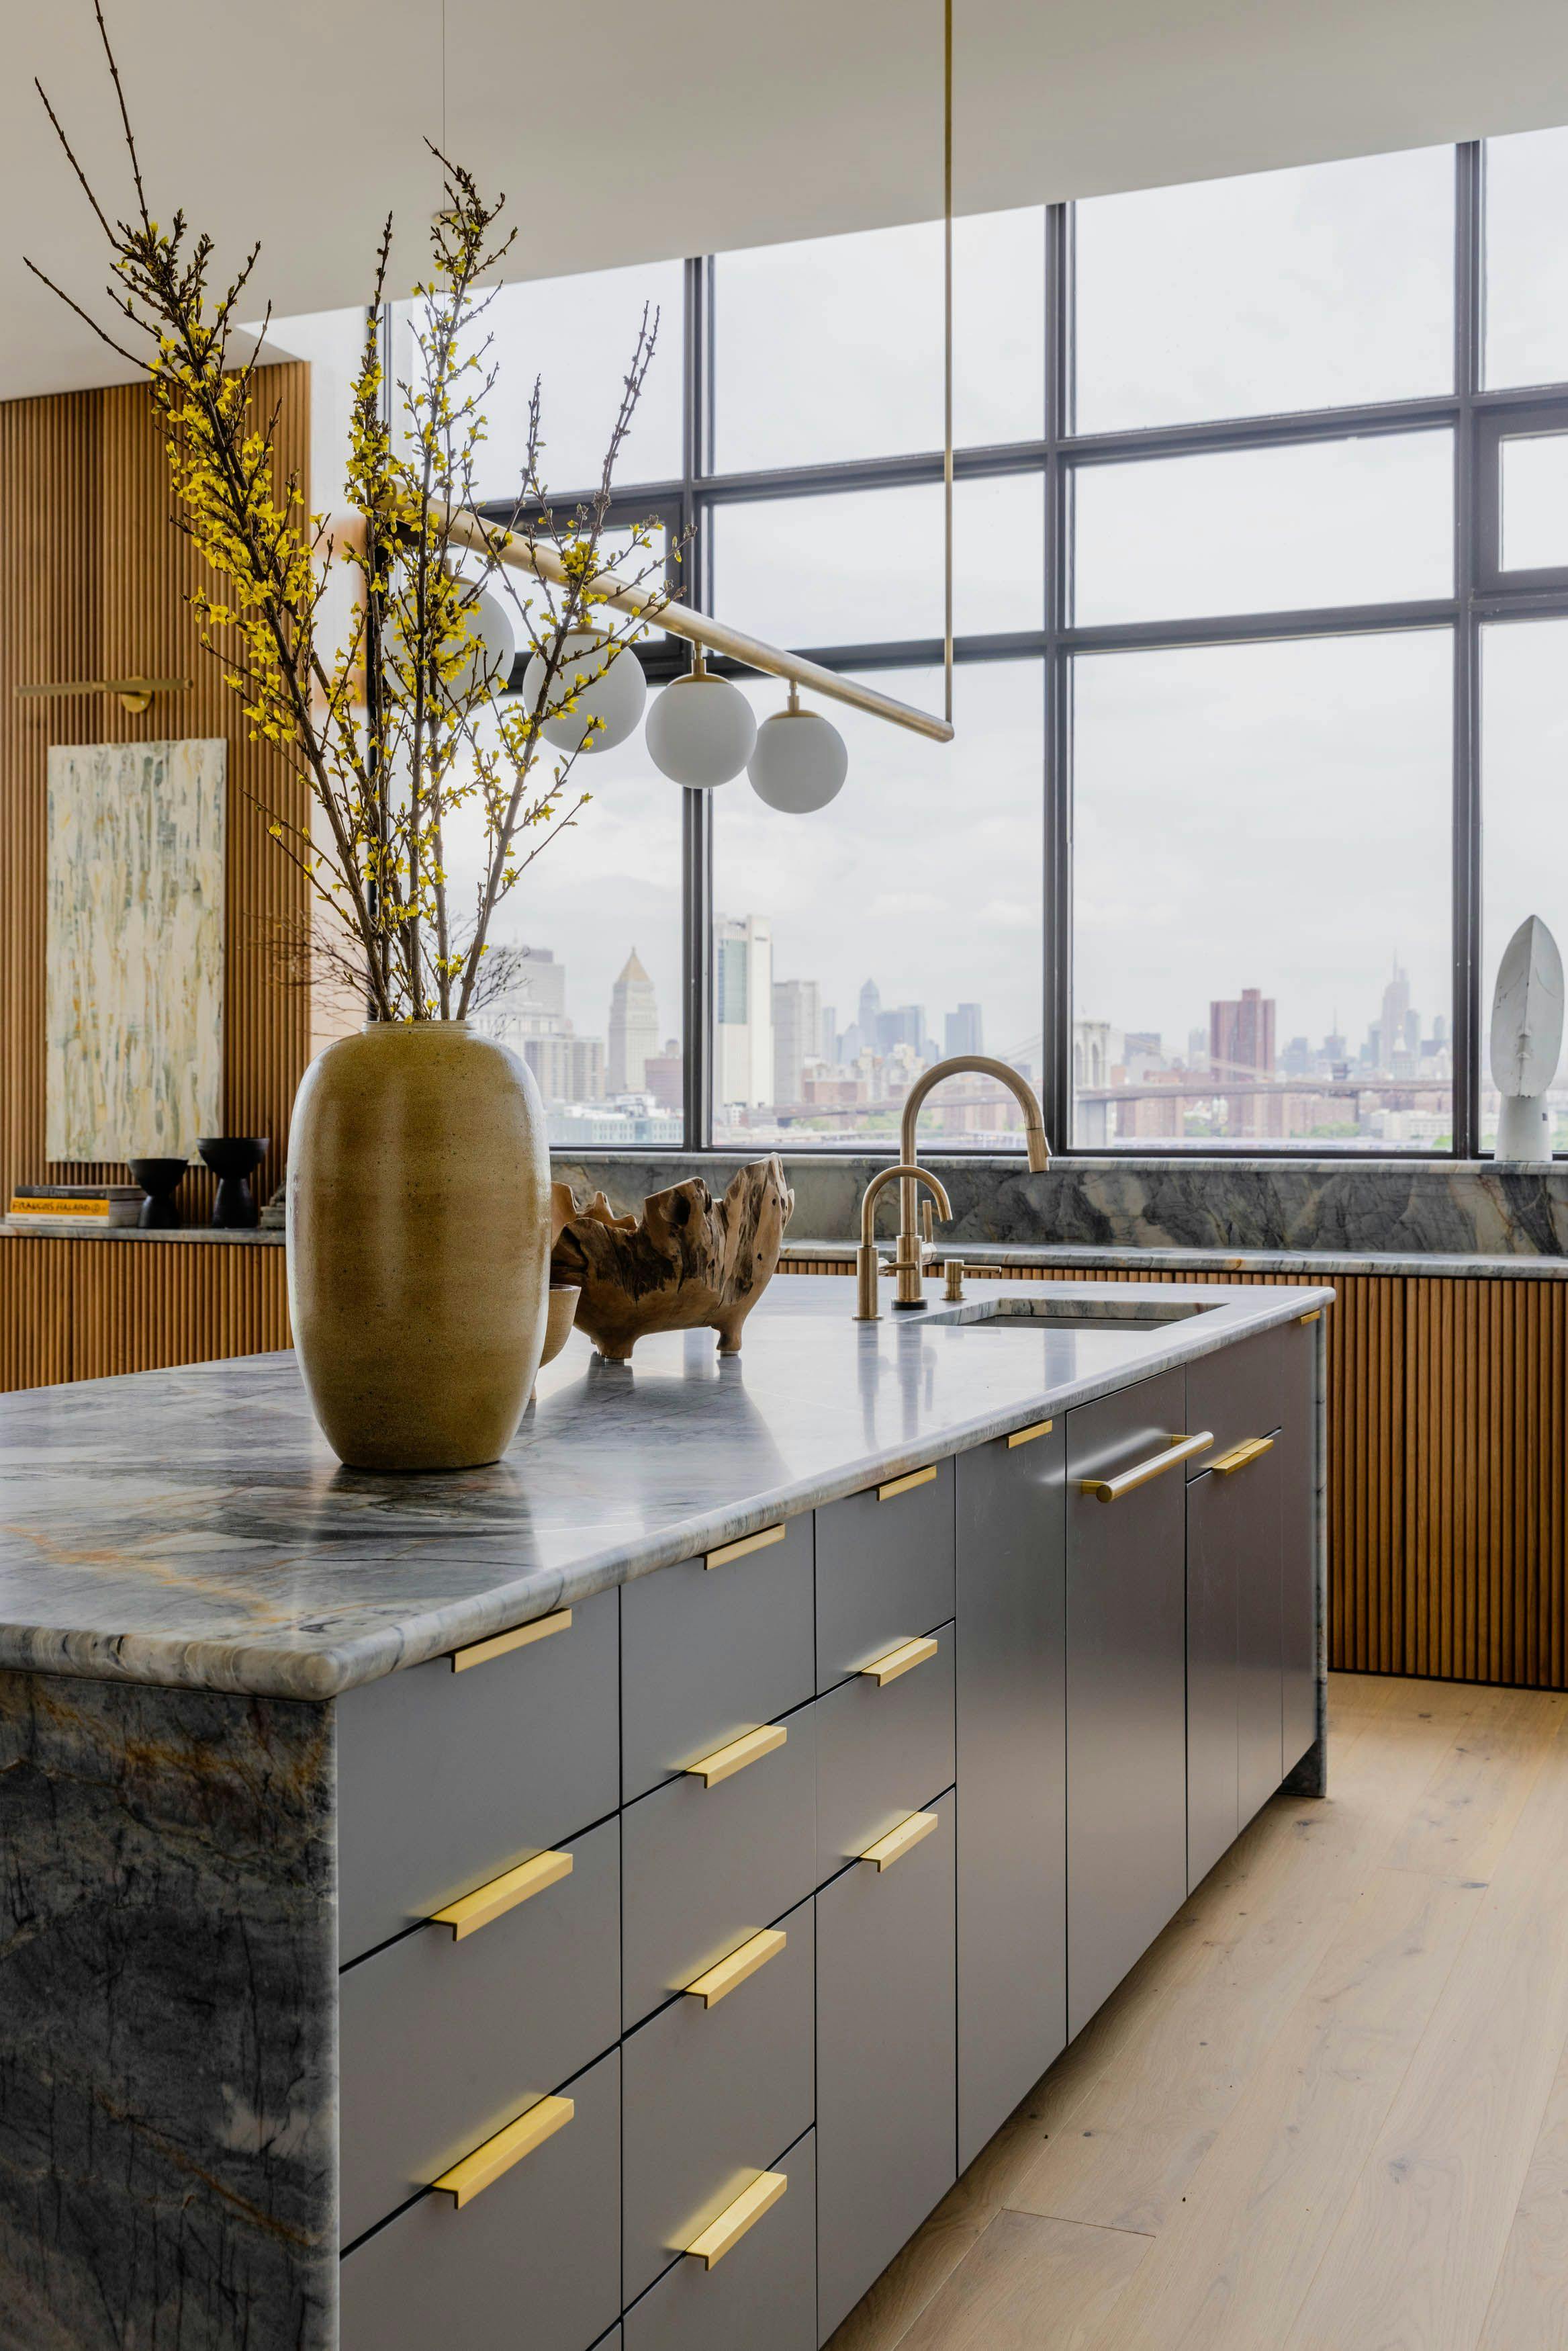 A kitchen with marble counter tops and brass fixtures in The Brooklyn Bridge Kitchen, a minimalist space with warm oak millwork and a striking monolithic island.